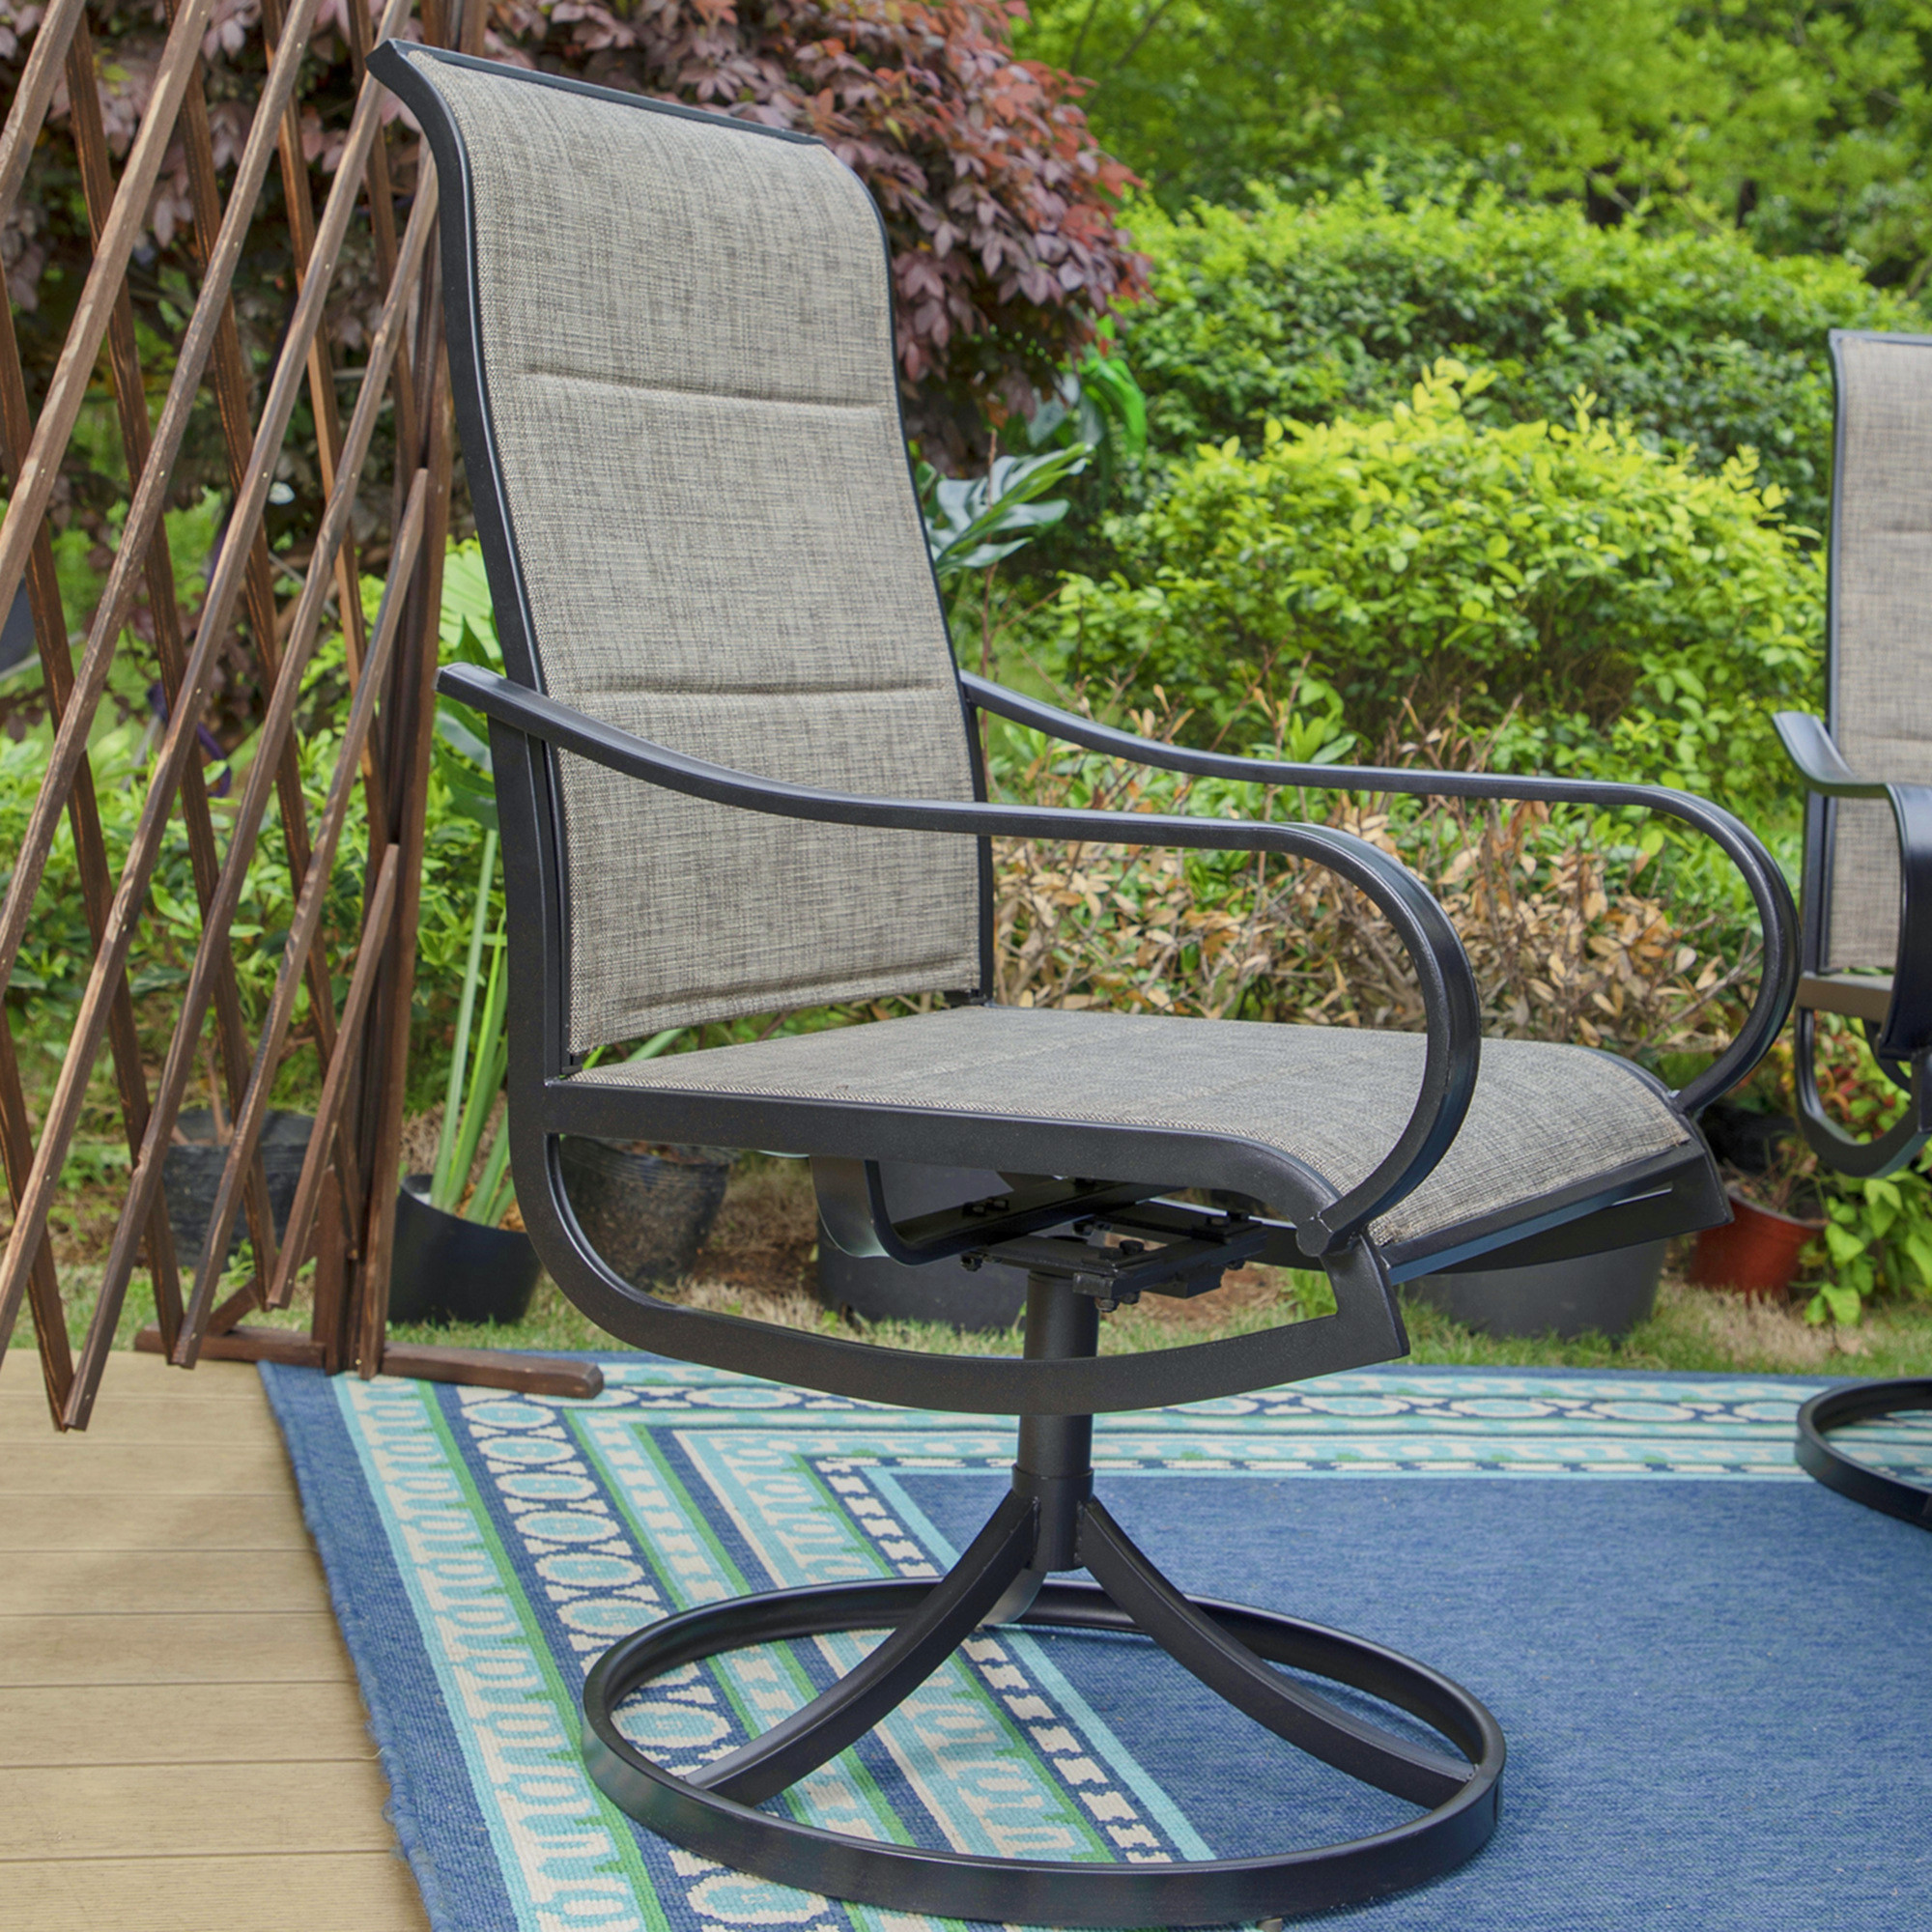 MF Studio Set of 2 High-Back Swivel Outdoor Dining Chairs with Padded Textilene Seat, Black & Dark Brown - image 3 of 11